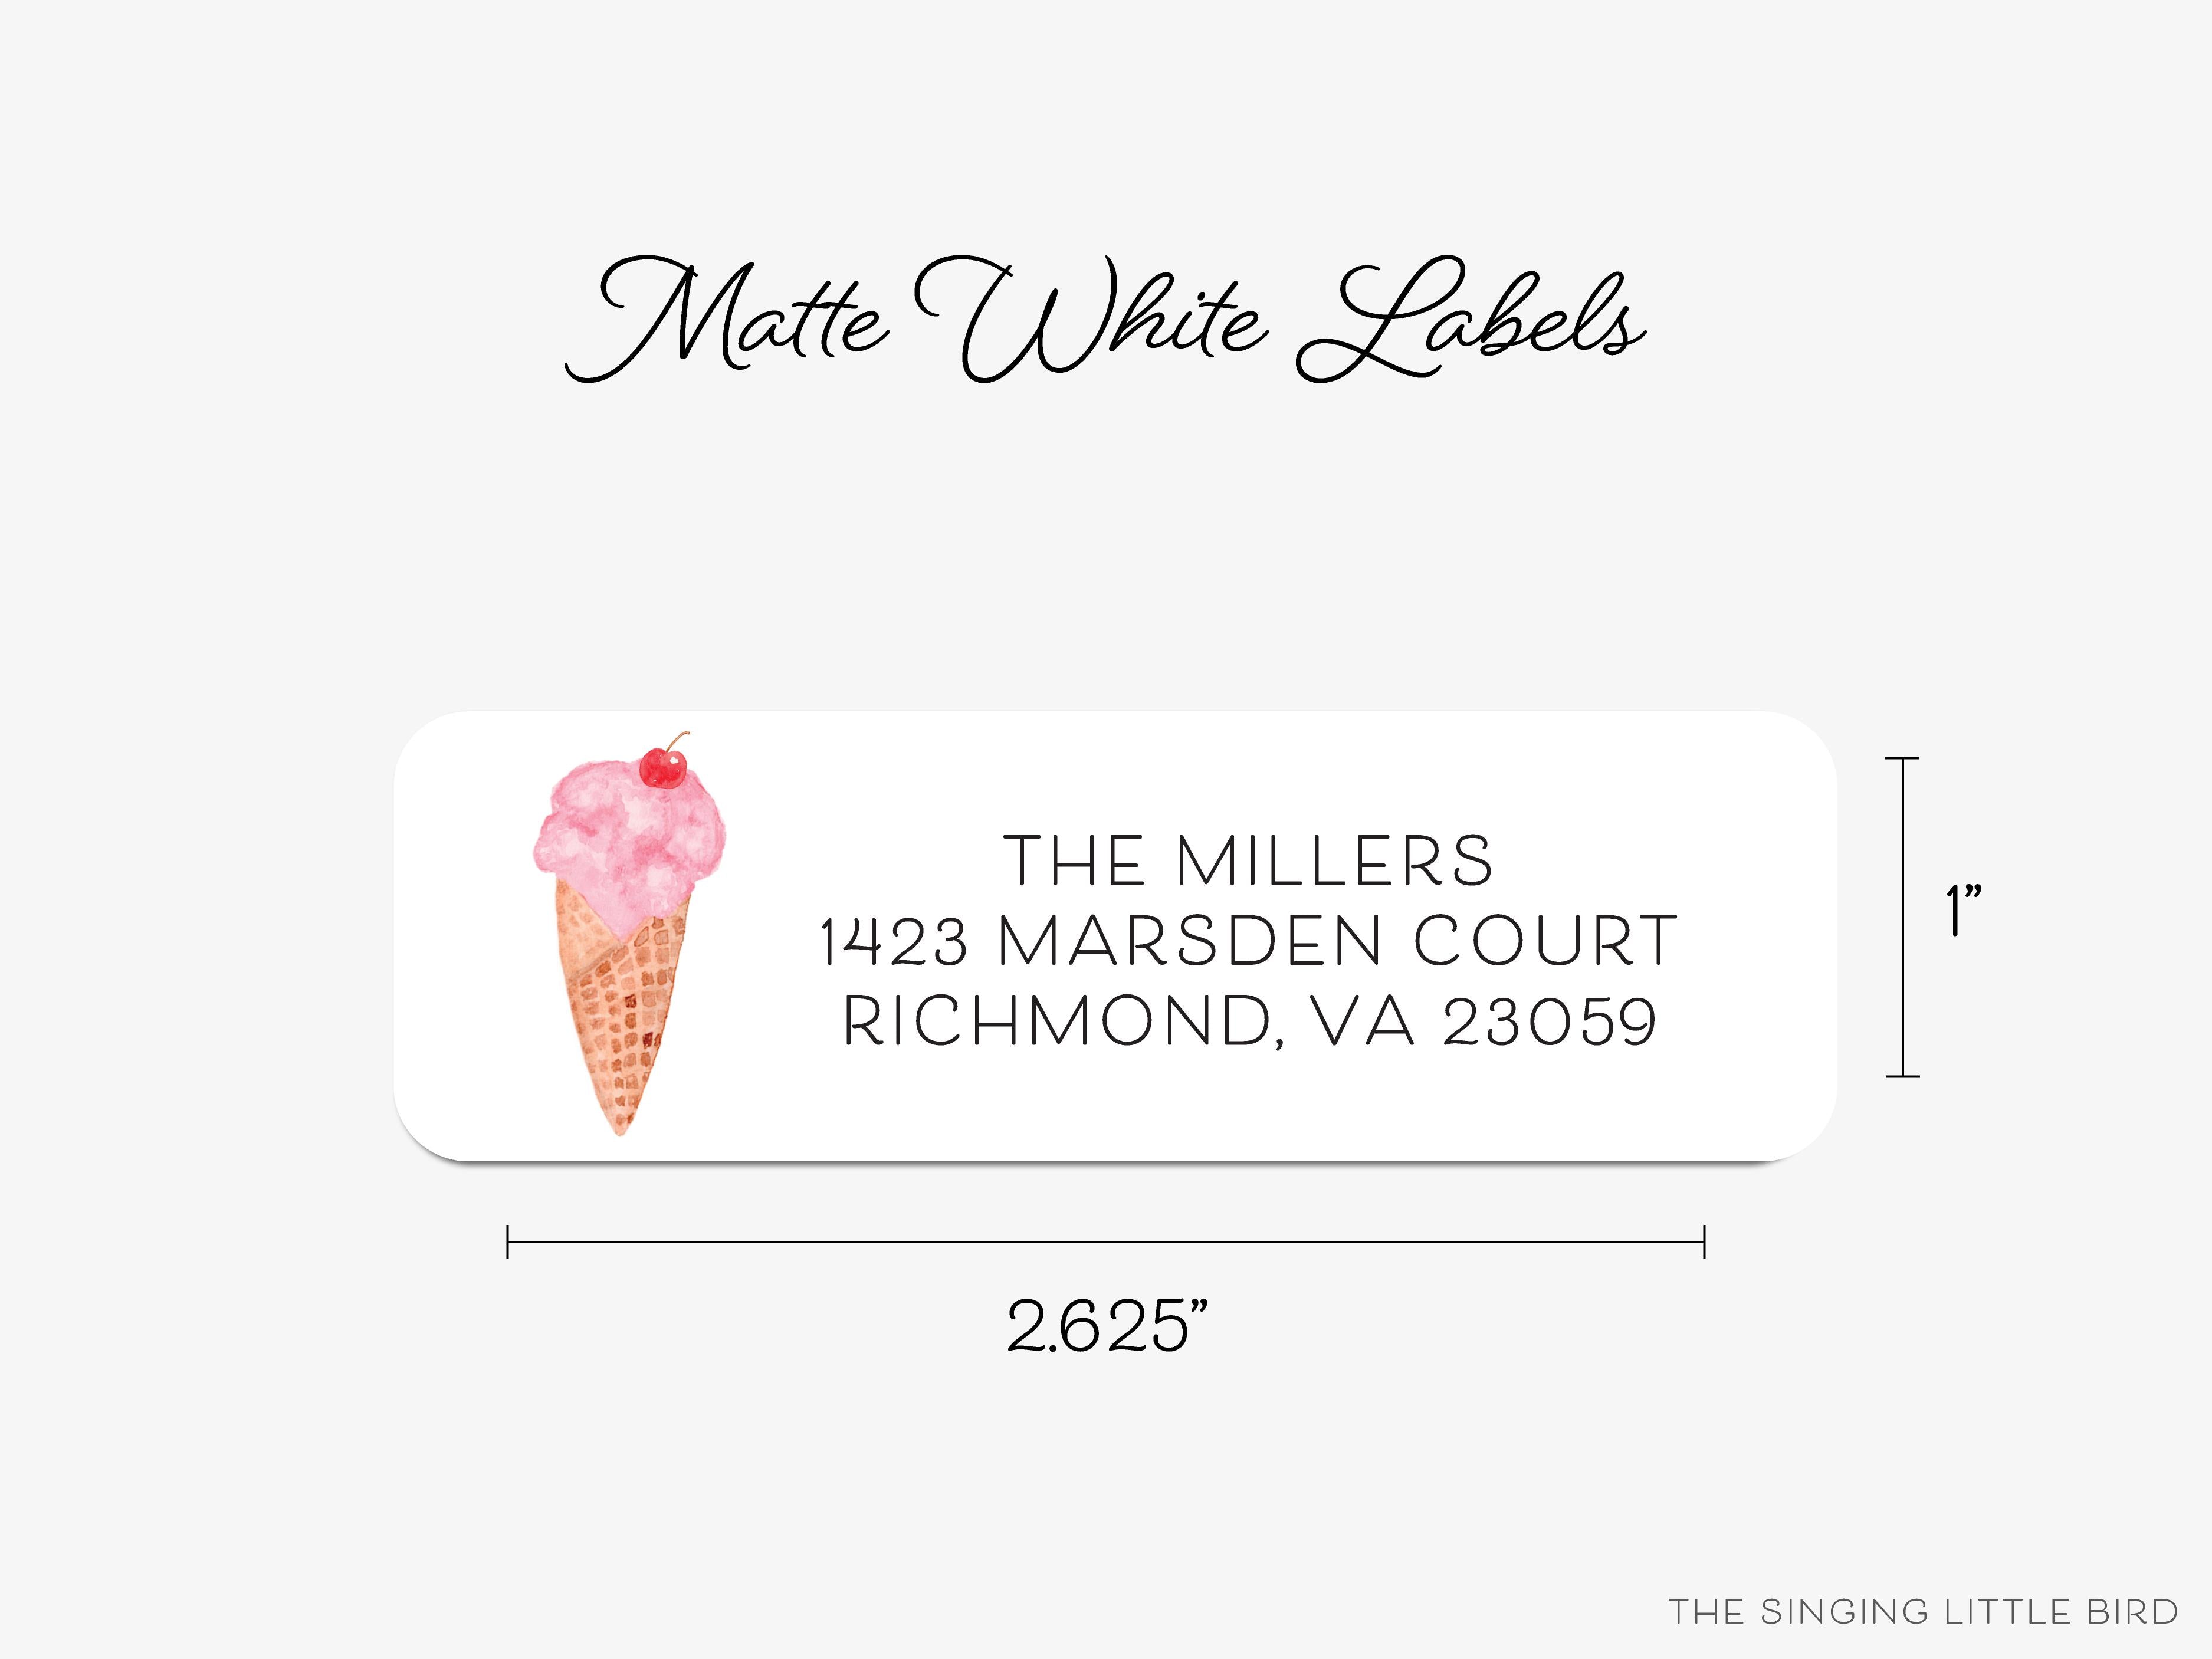 Ice Cream Cone Return Address Labels- These personalized return address labels are 2.625" x 1" and feature our hand-painted watercolor ice cream cone, printed in the USA on beautiful matte finish labels. These make great gifts for yourself or the sweet tooth lover. -The Singing Little Bird